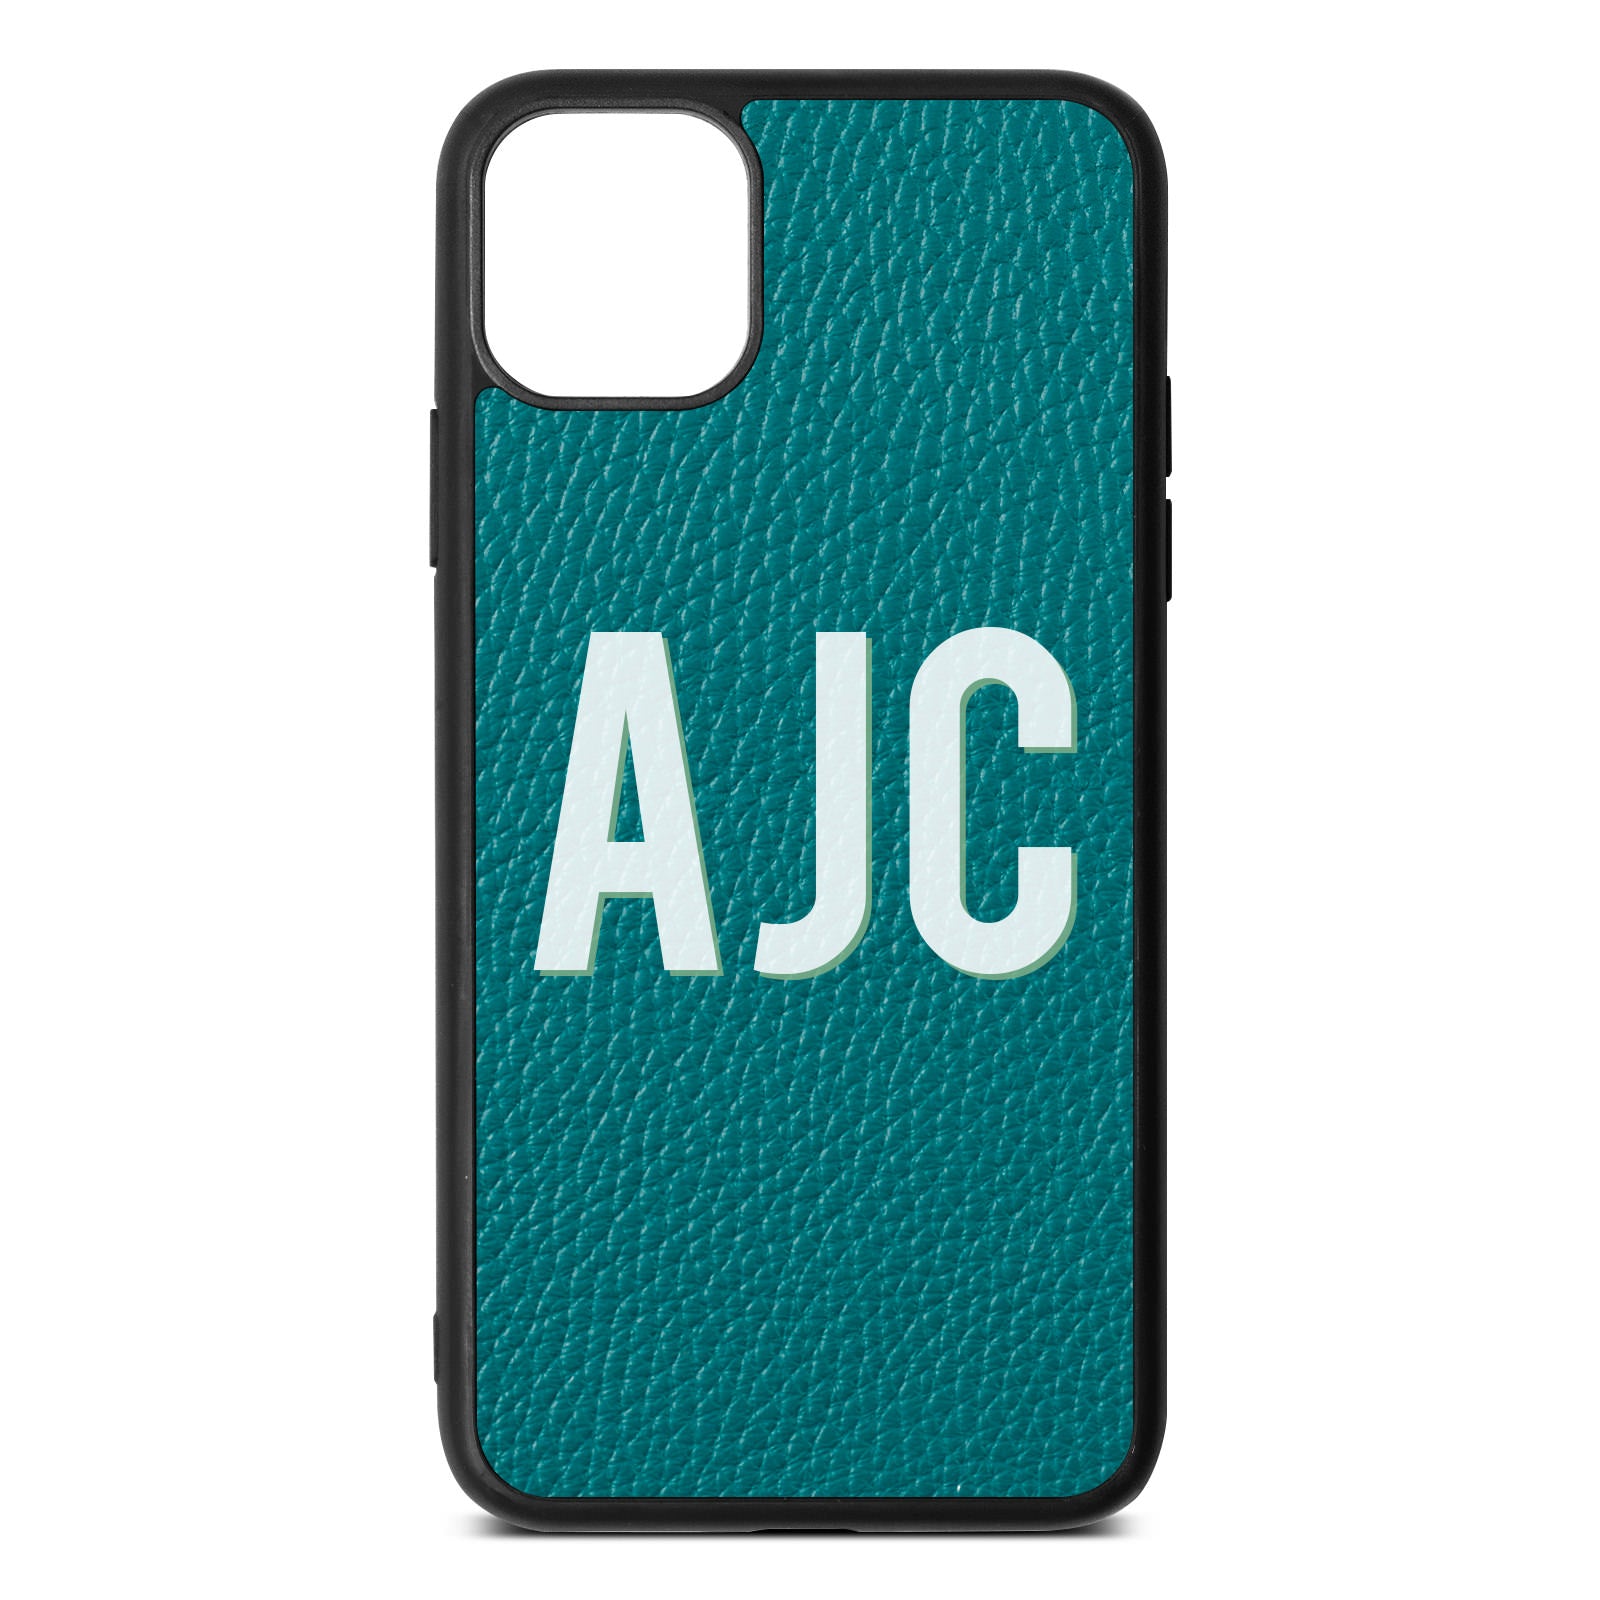 iPhone 11 Pro Max Pebble Green Leather iPhone Case